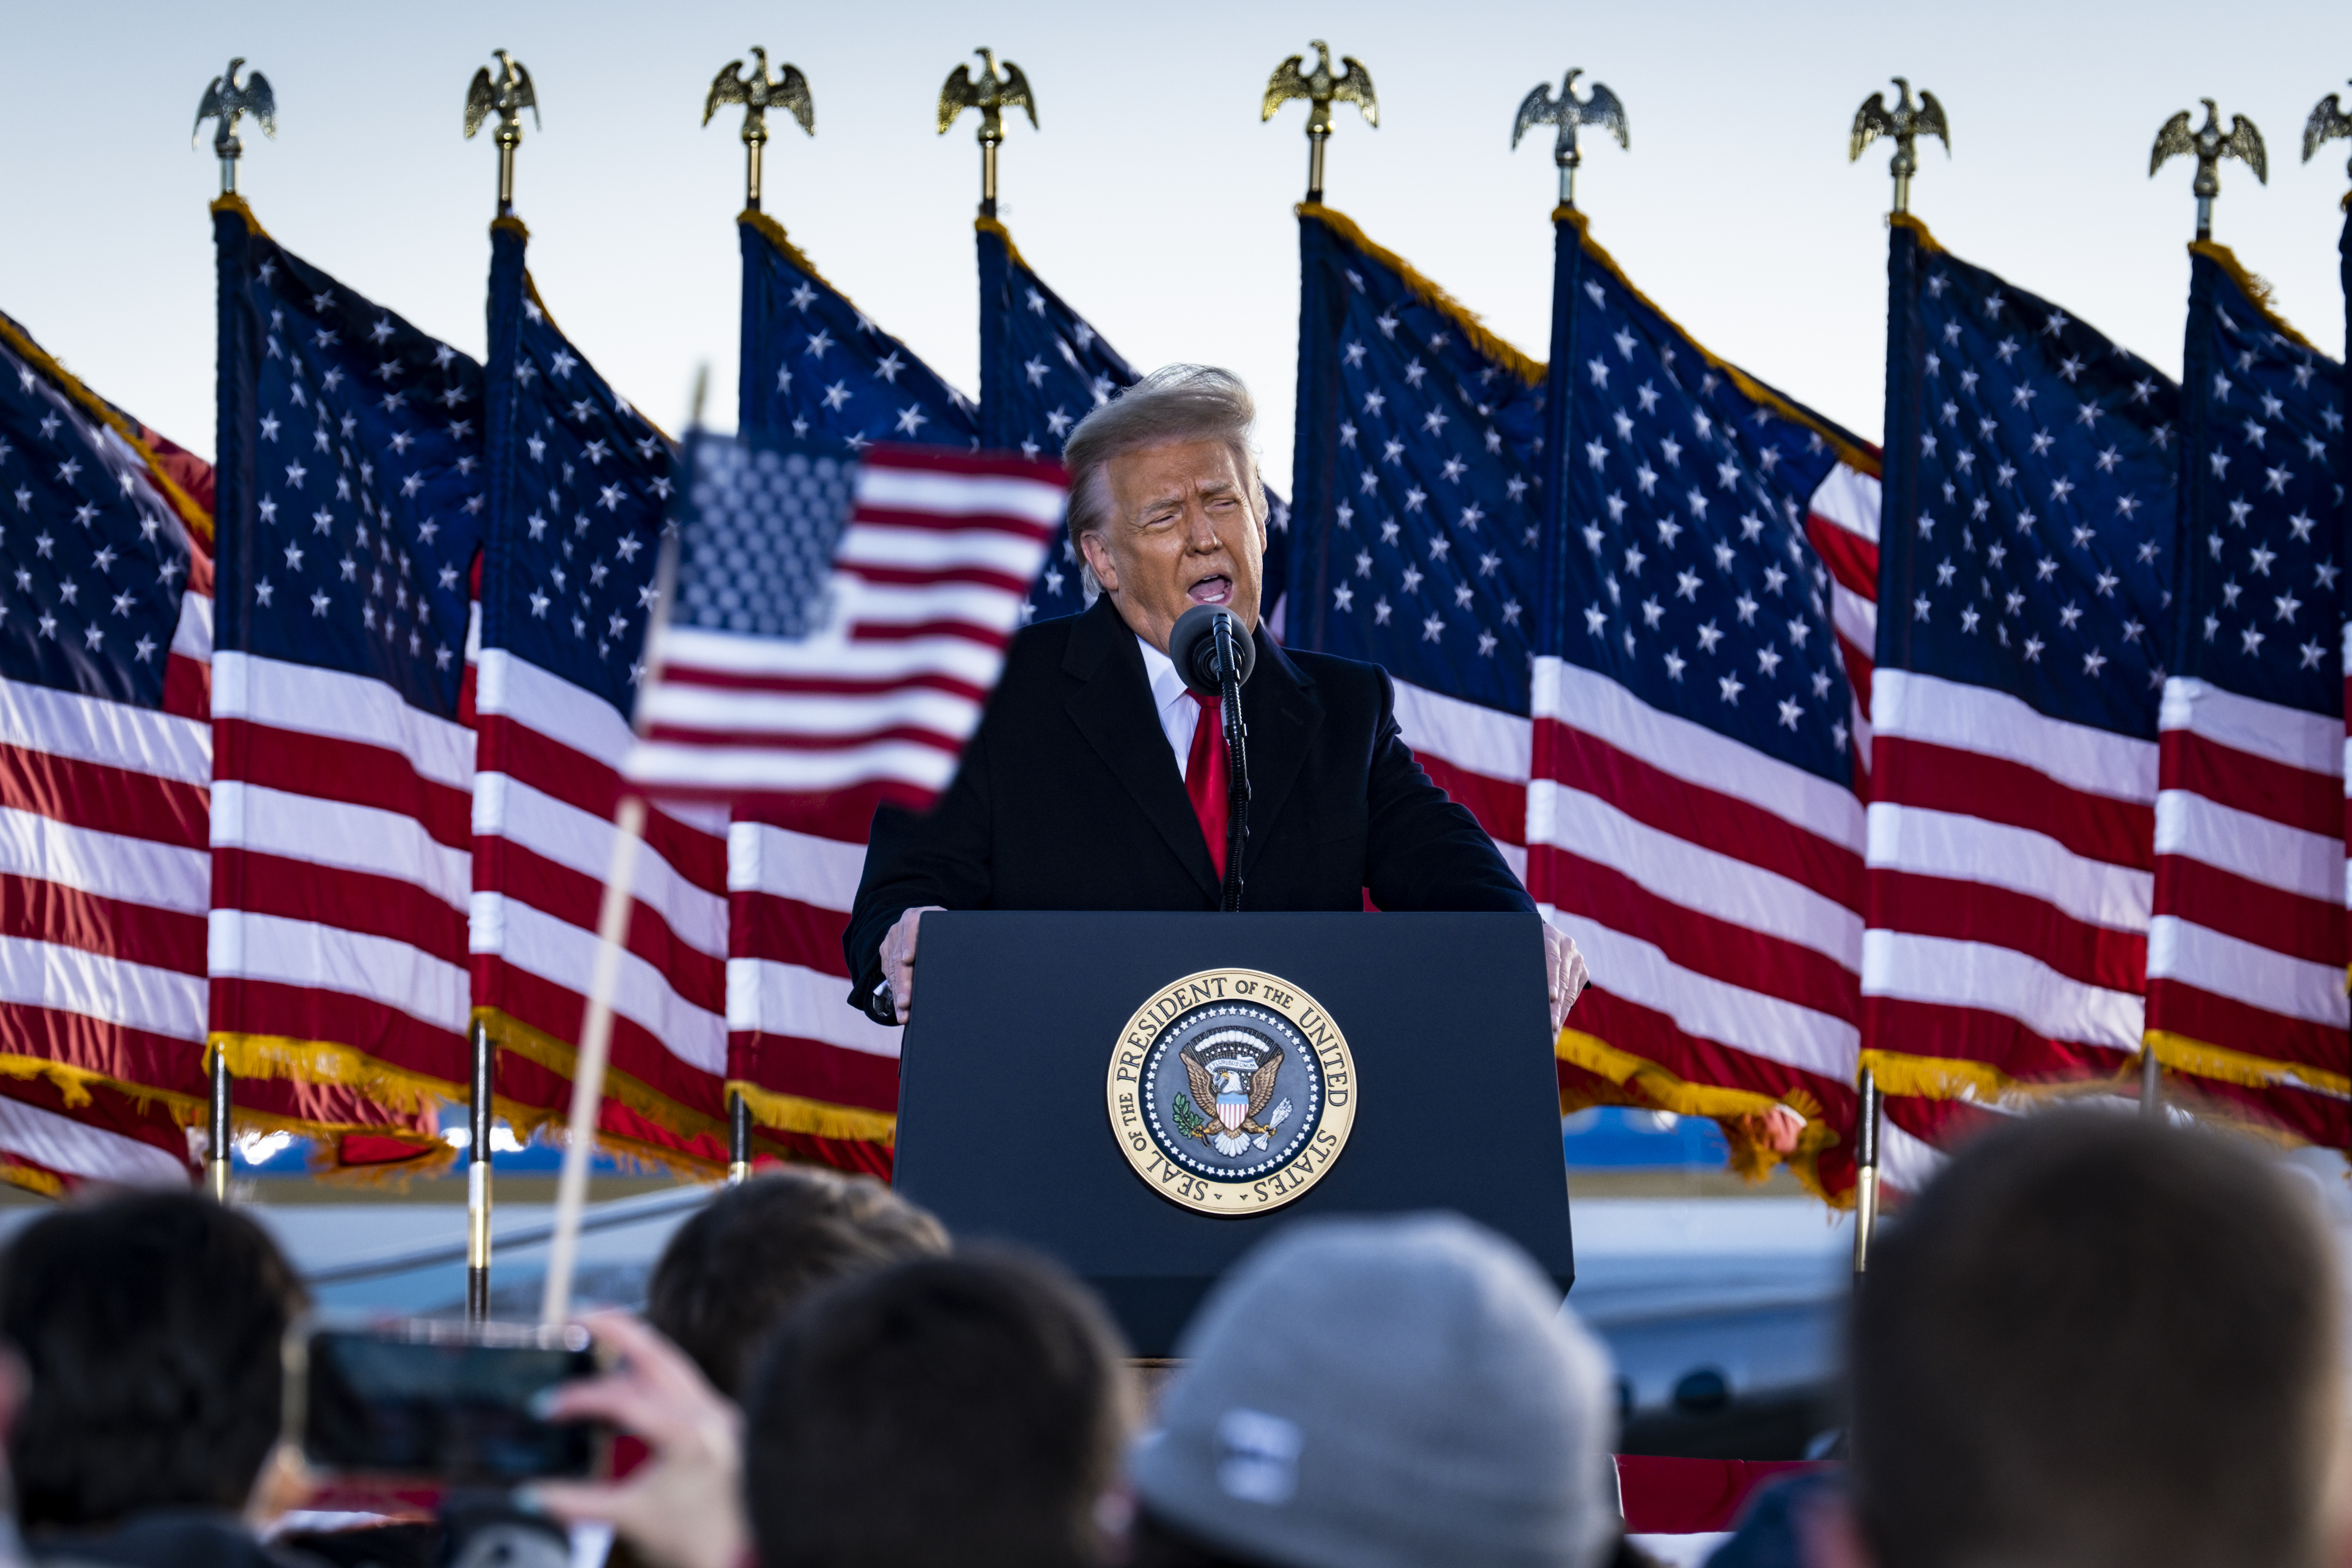 President Trump backed by American flags and speaking to a small crowd on the tarmac at Joint Base Andrews.